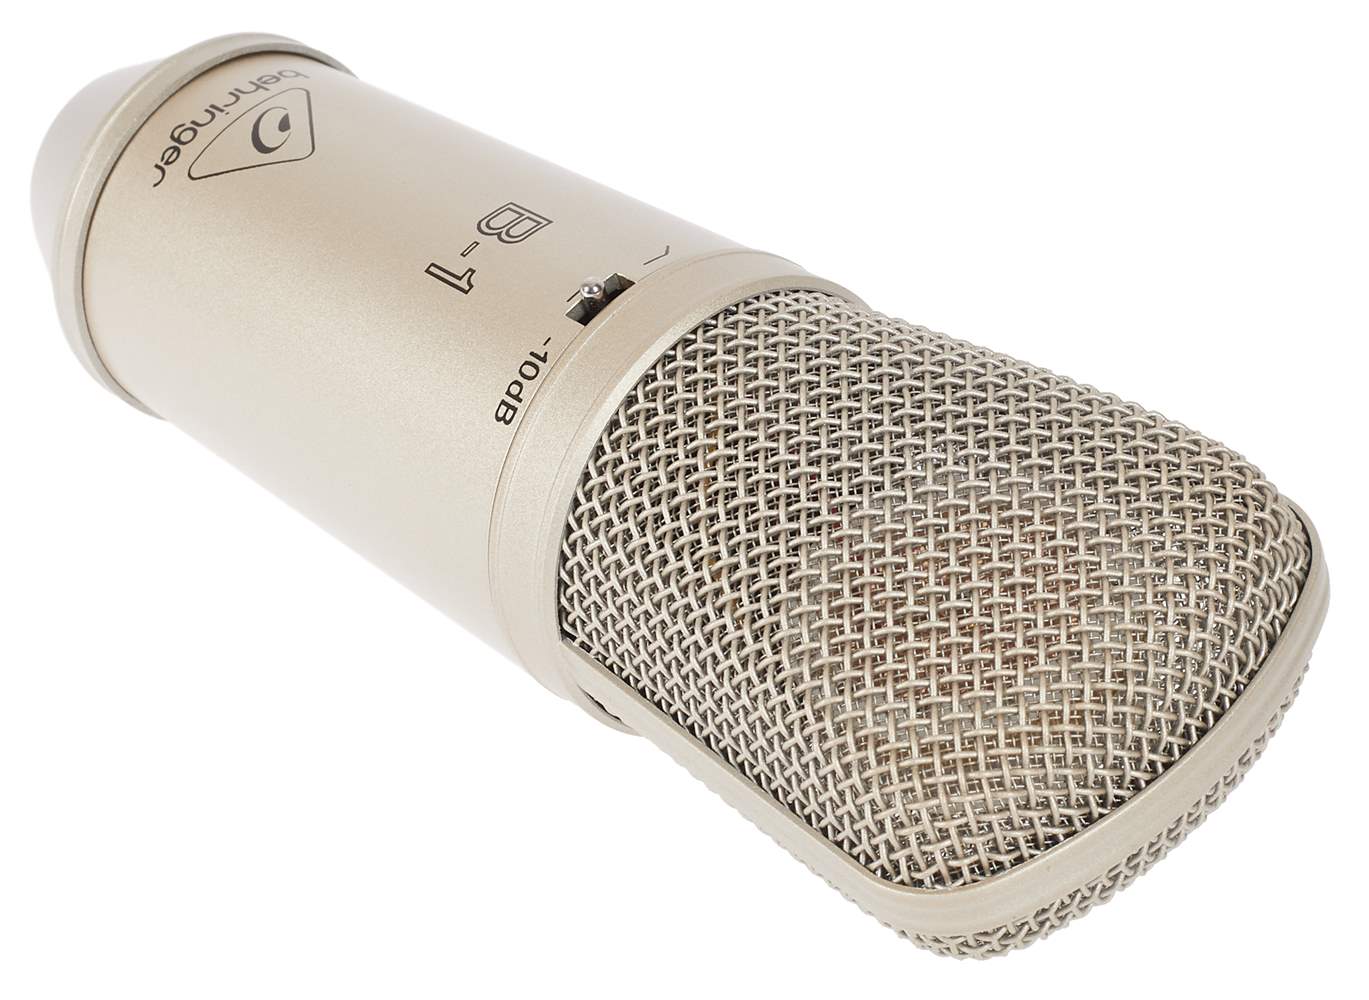 BEHRINGER B-1 Condenser Microphone | Kytary.ie